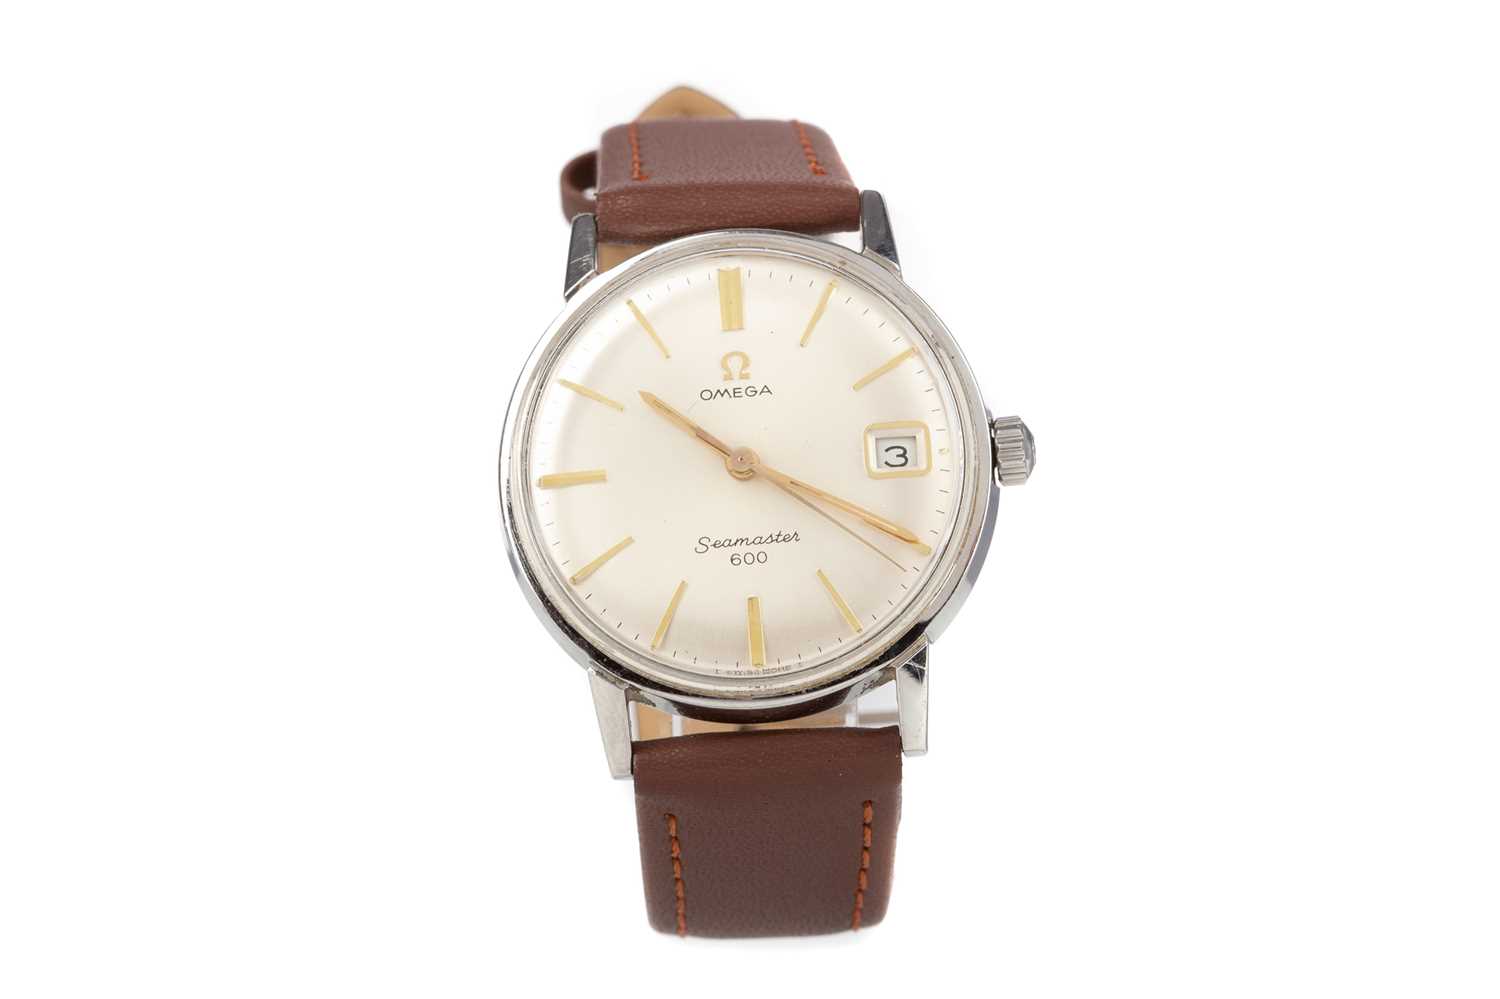 Lot 870 - A GENTLEMAN'S OMEGA SEAMASTER 600 STAINLESS STEEL MANUAL WIND WRIST WATCH